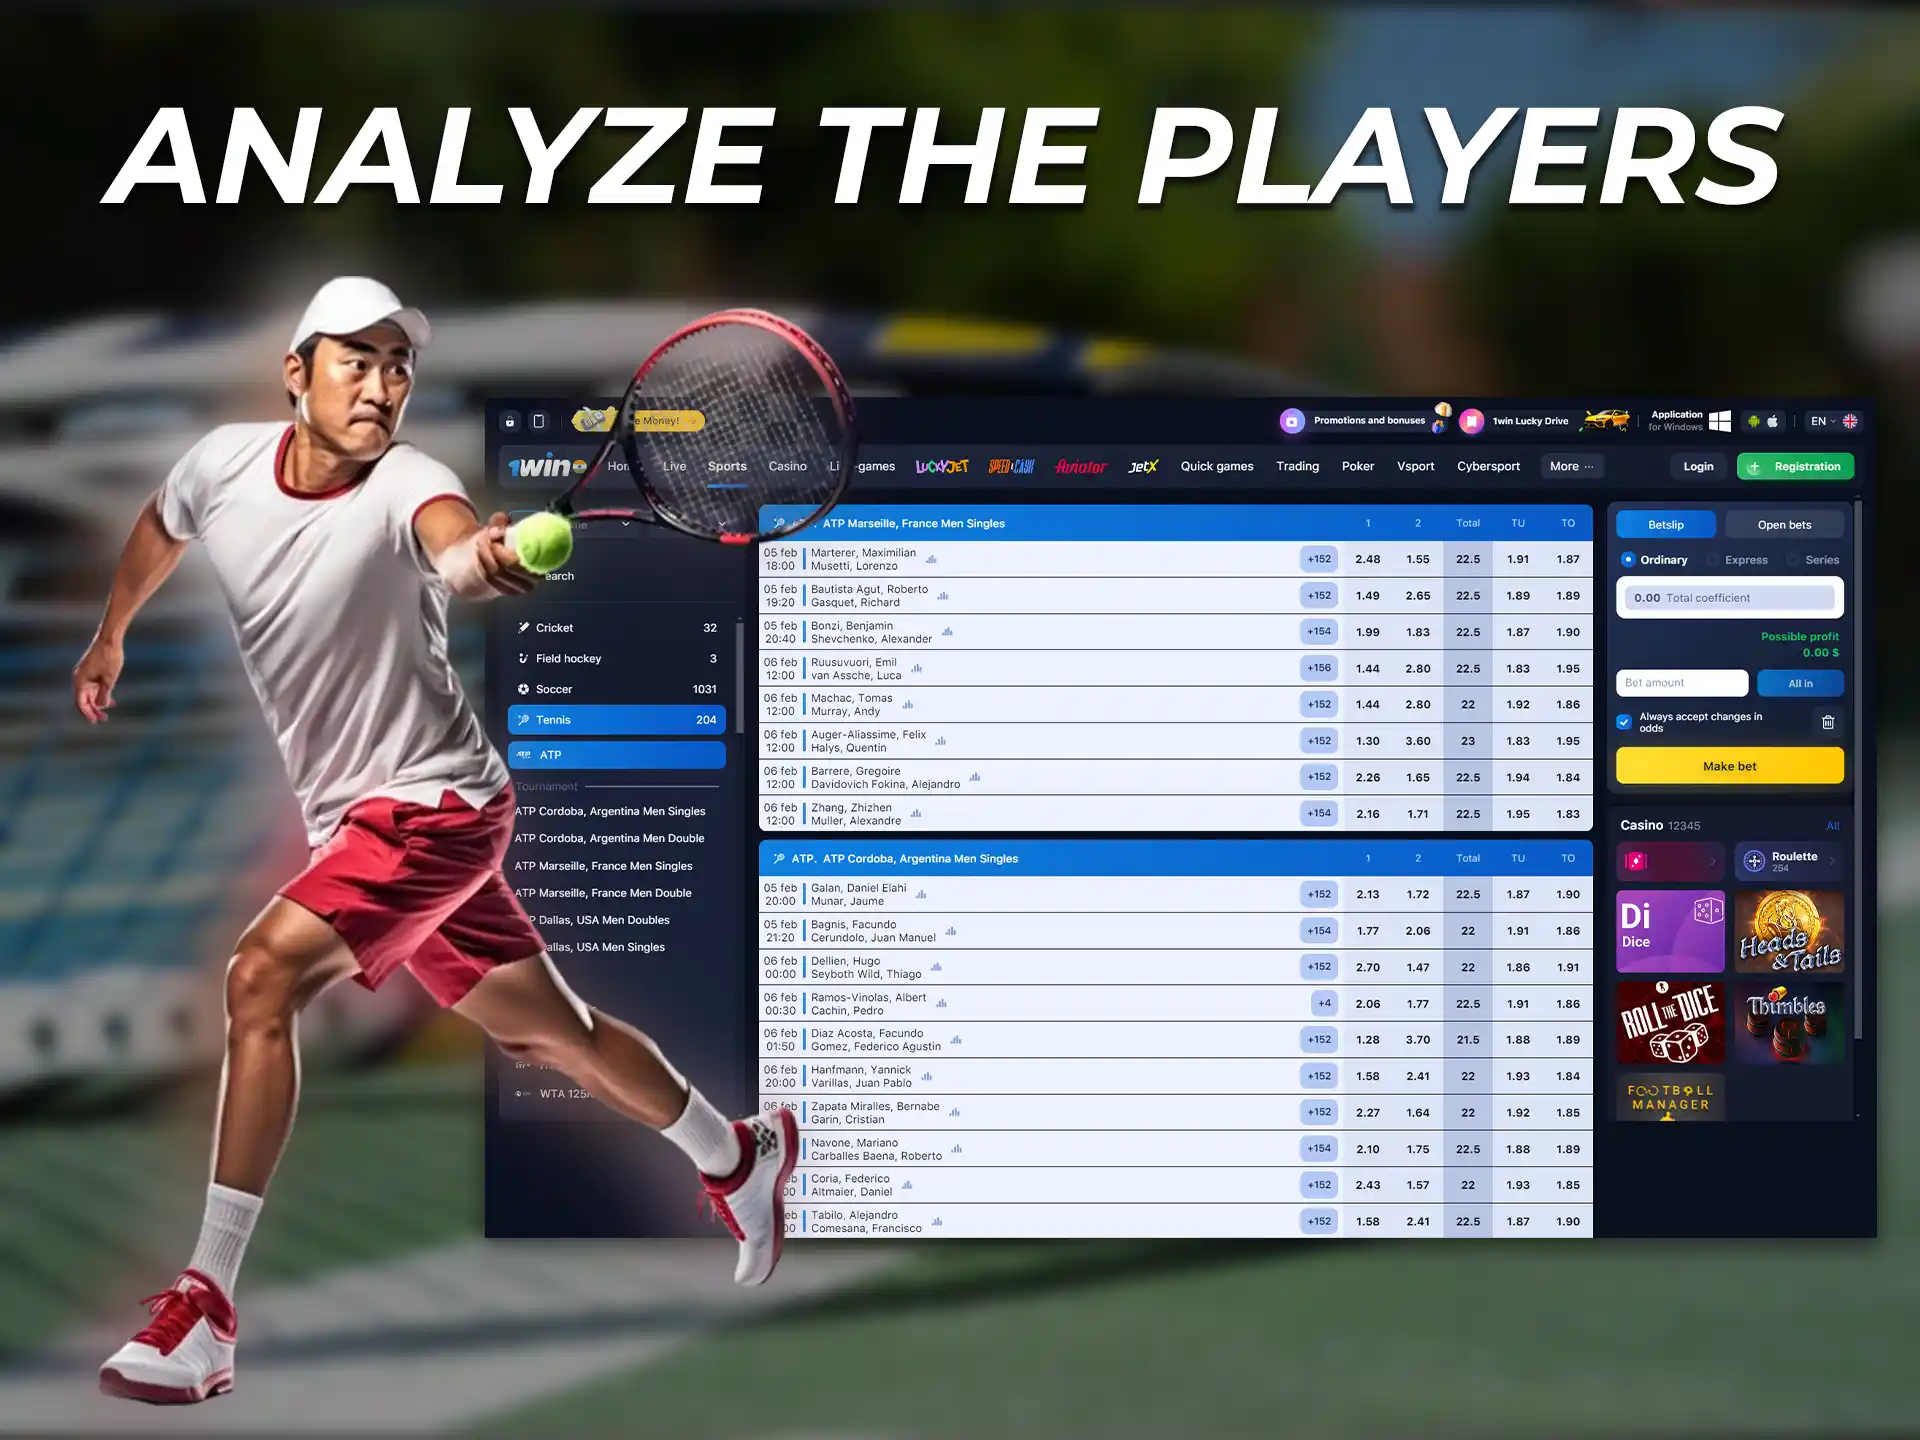 To make the right bet in advance check out the statistics of the players.